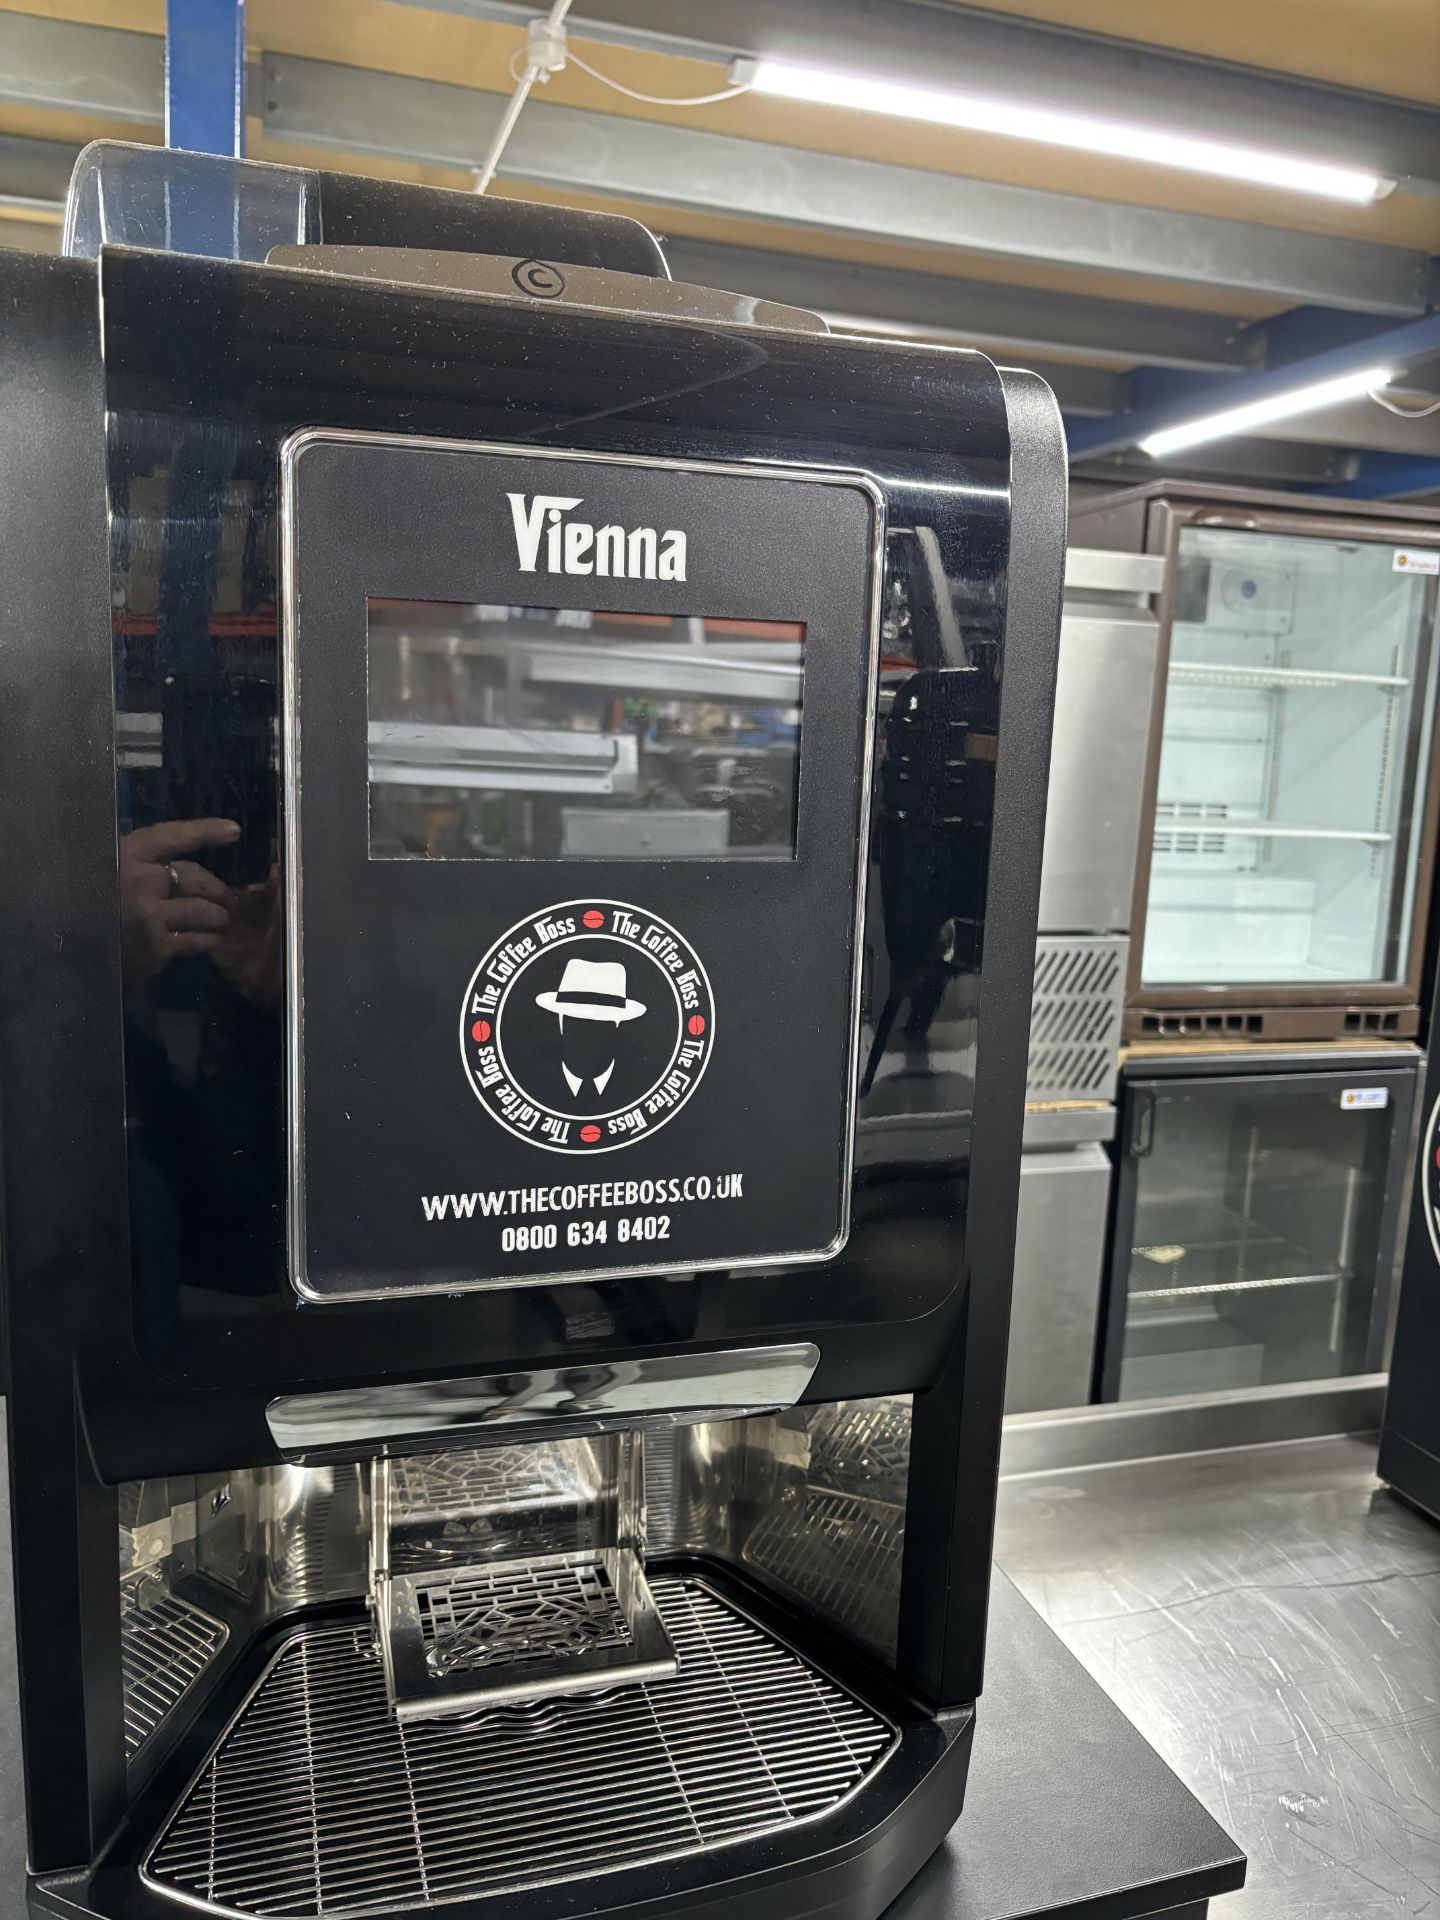 Manufacturer: Evoca (Coffee Boss)Model: Krea Touch (Vienna) - Image 3 of 9